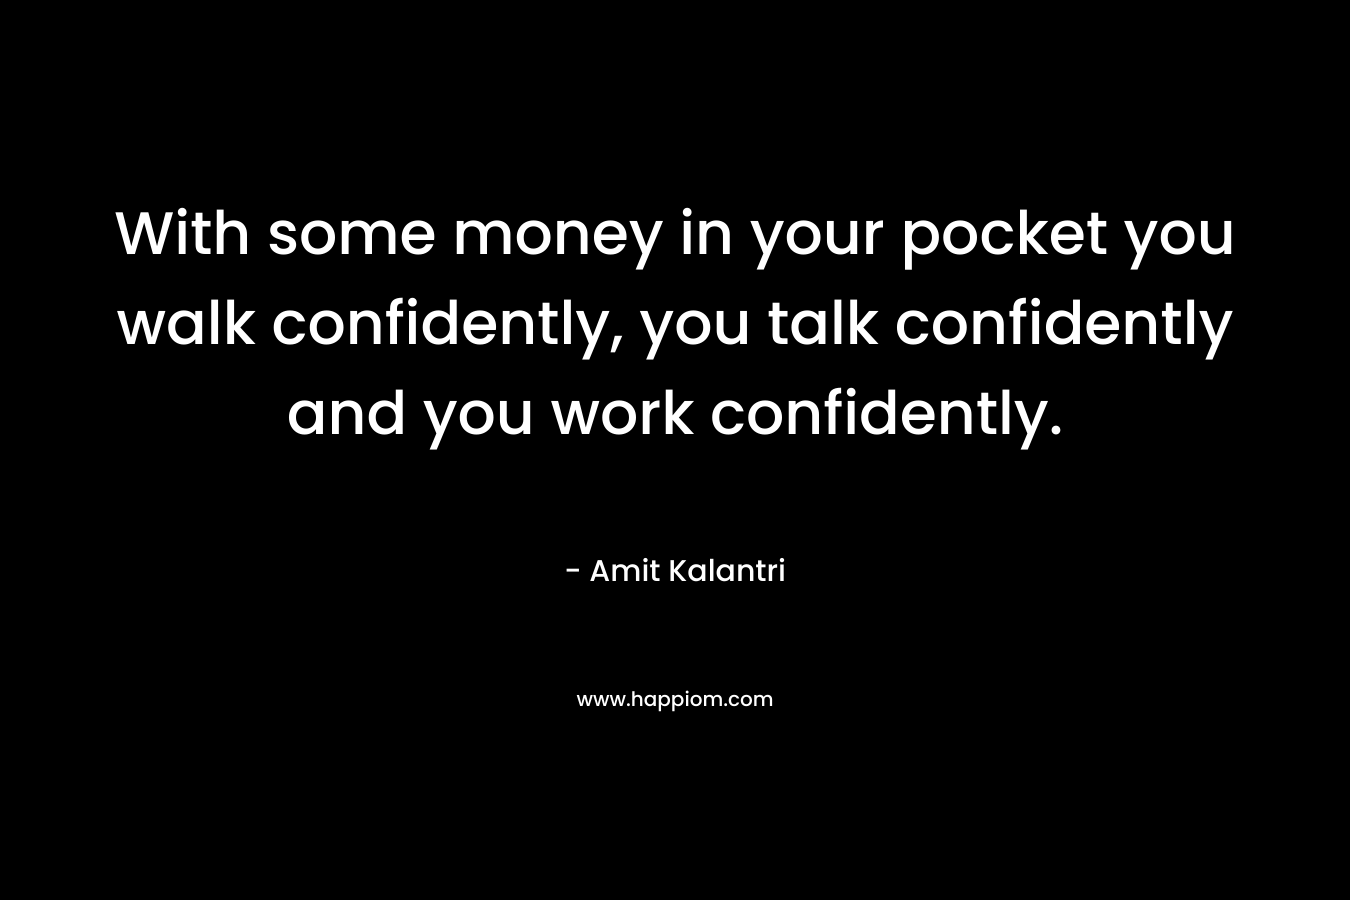 With some money in your pocket you walk confidently, you talk confidently and you work confidently.